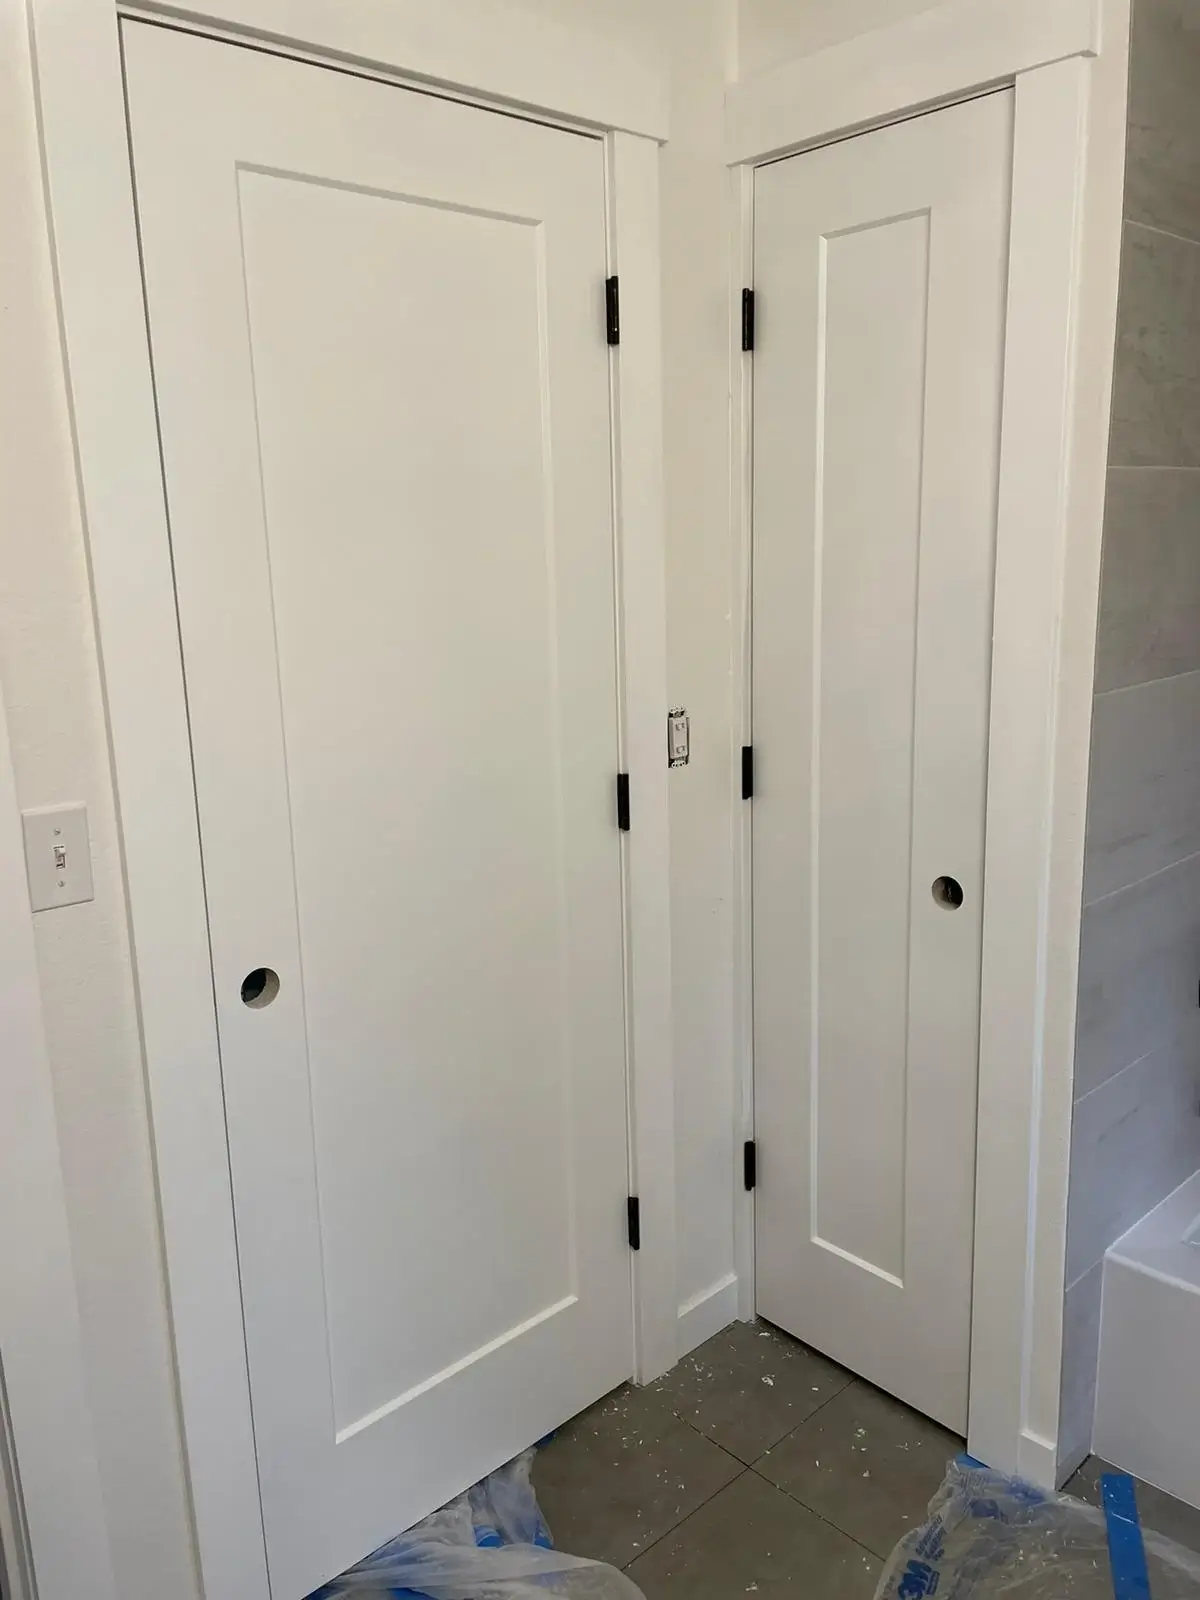 Image where you can see two doors recently installed by Leo's flooring